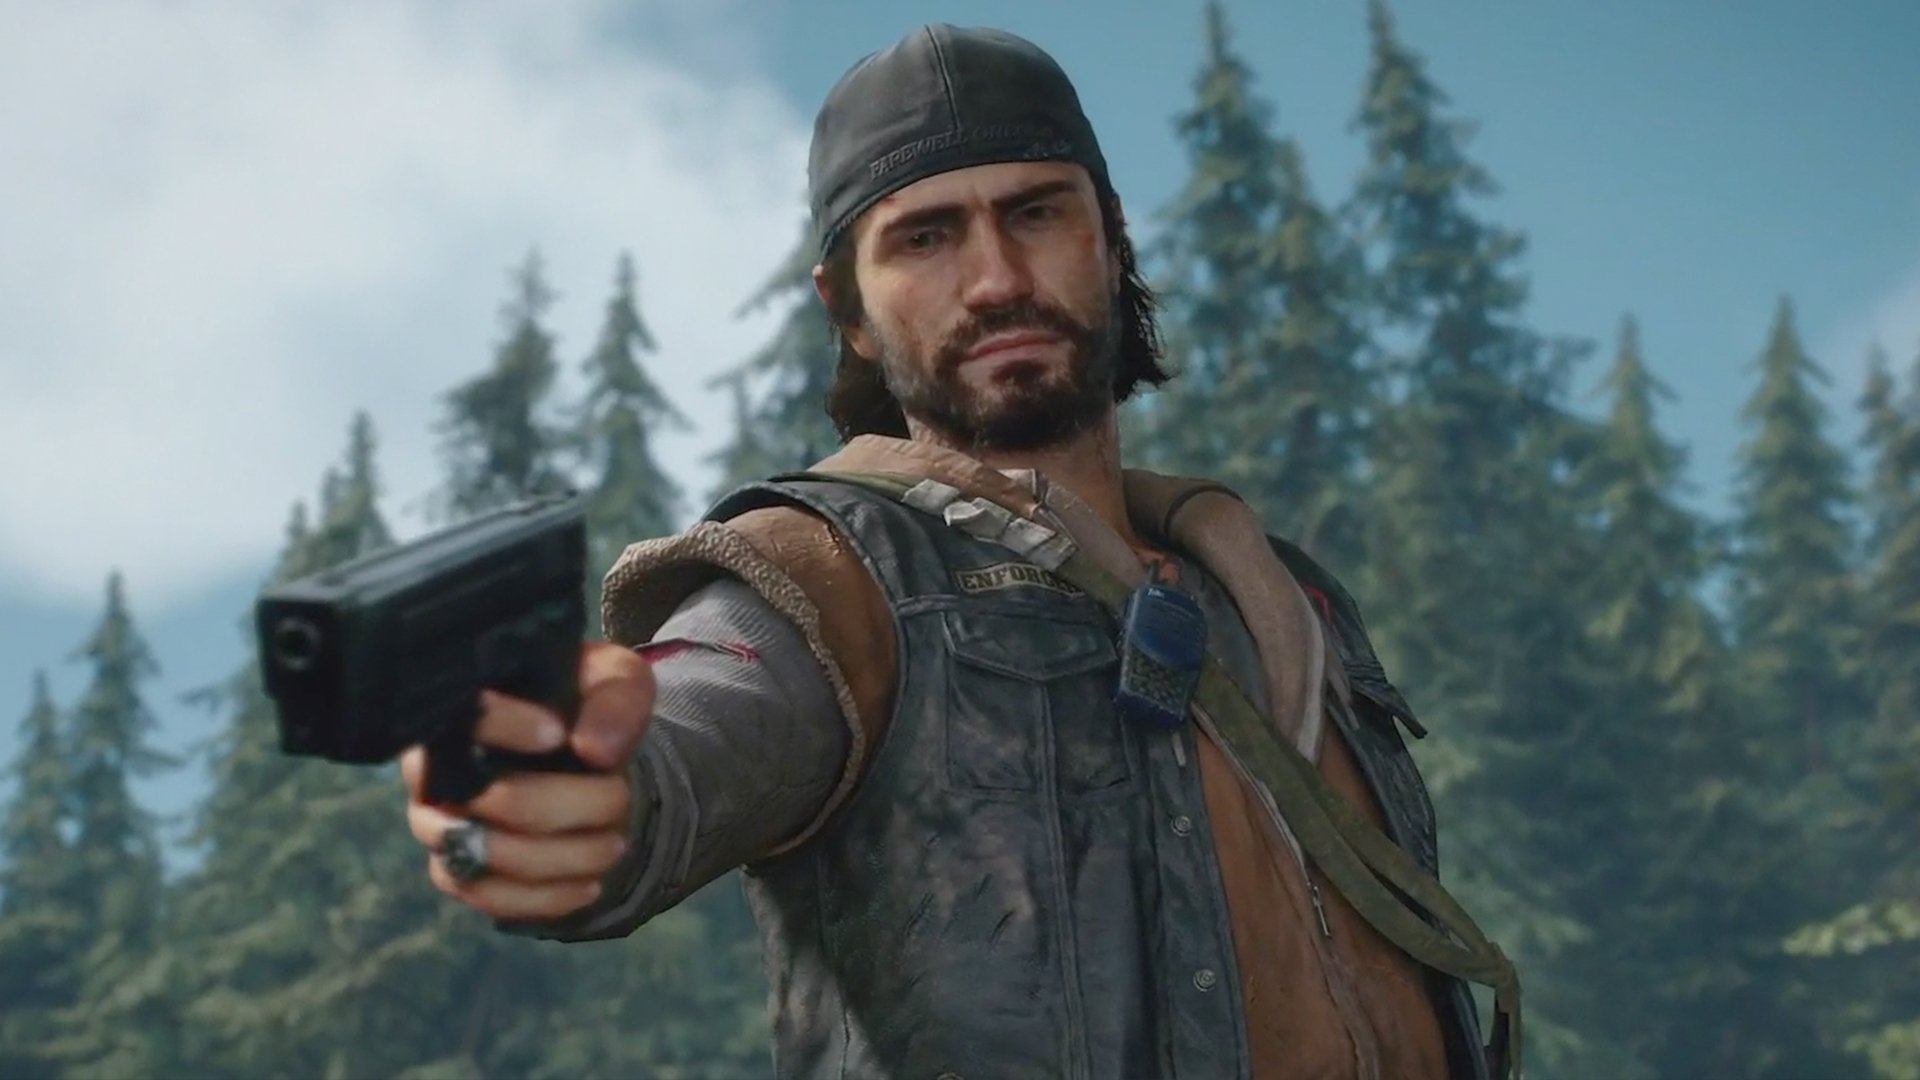 This Days Gone Statue Will Set You Back $380 and It’s Available for Preorder